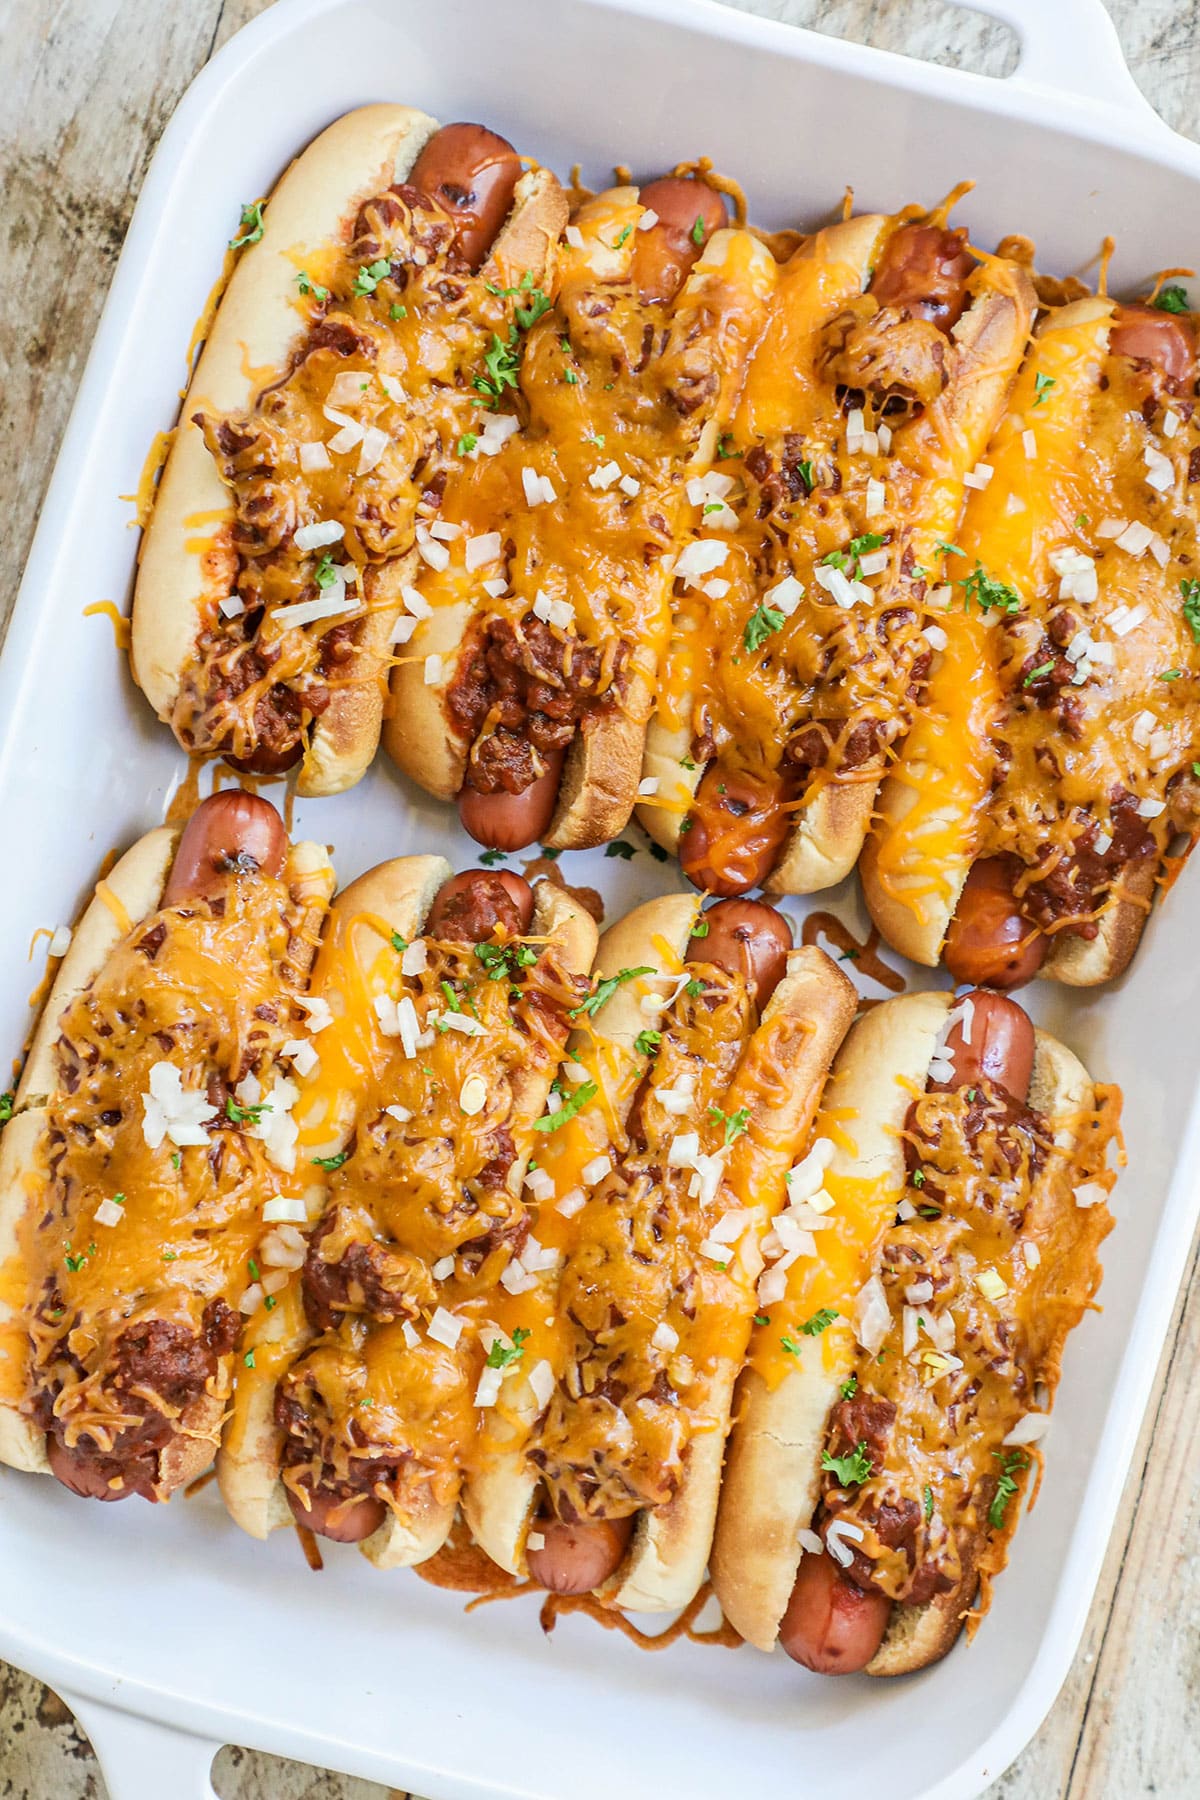 hot dogs topped with chili in a white casserole dish